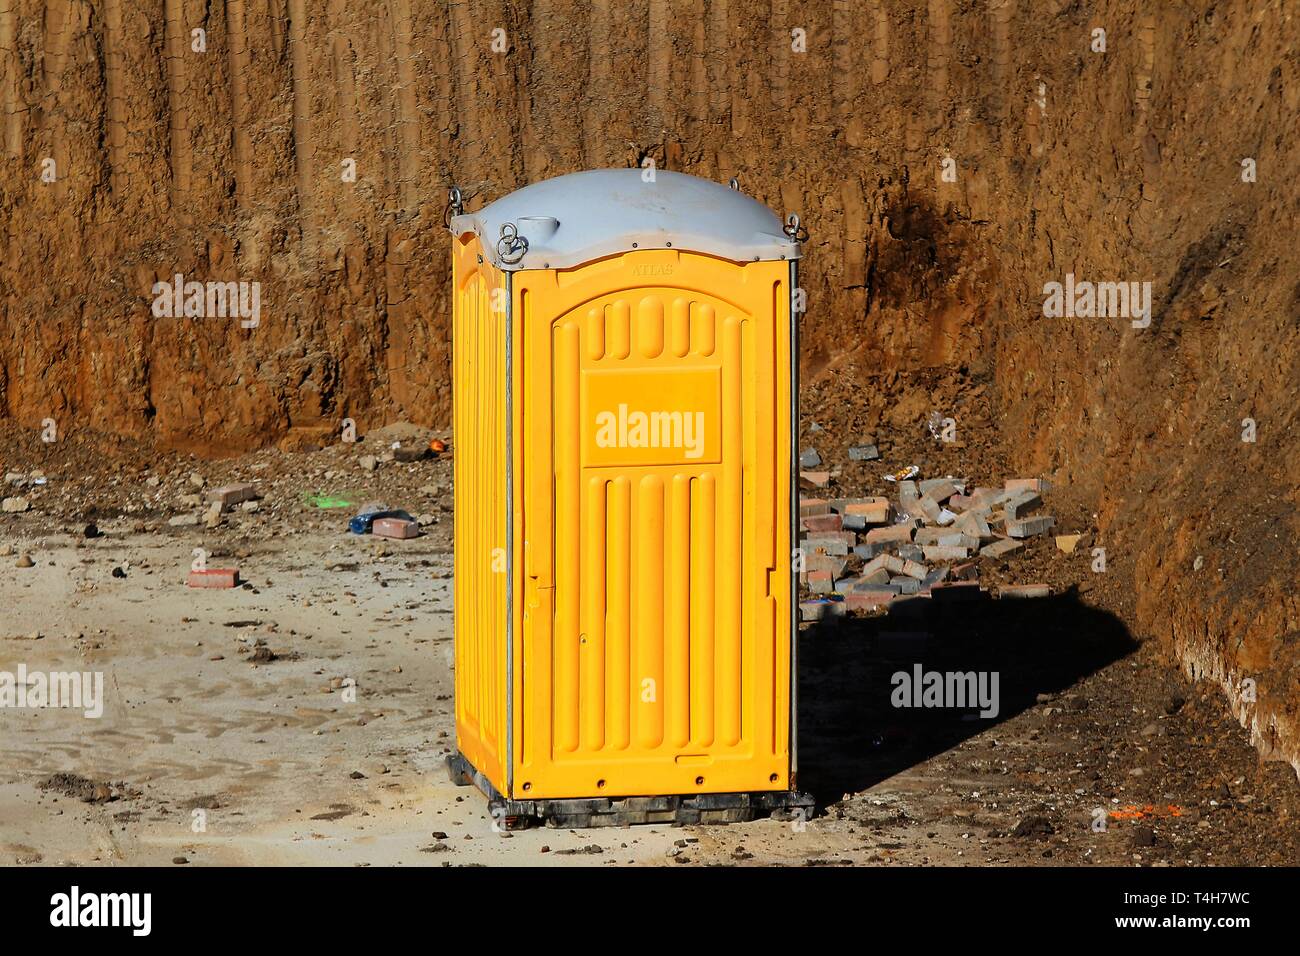 Bucharest, Romania - March 19, 2019: An yellow portable plastic toilet cabin is seen on a building site in Bucharest. This image is for editorial use  Stock Photo